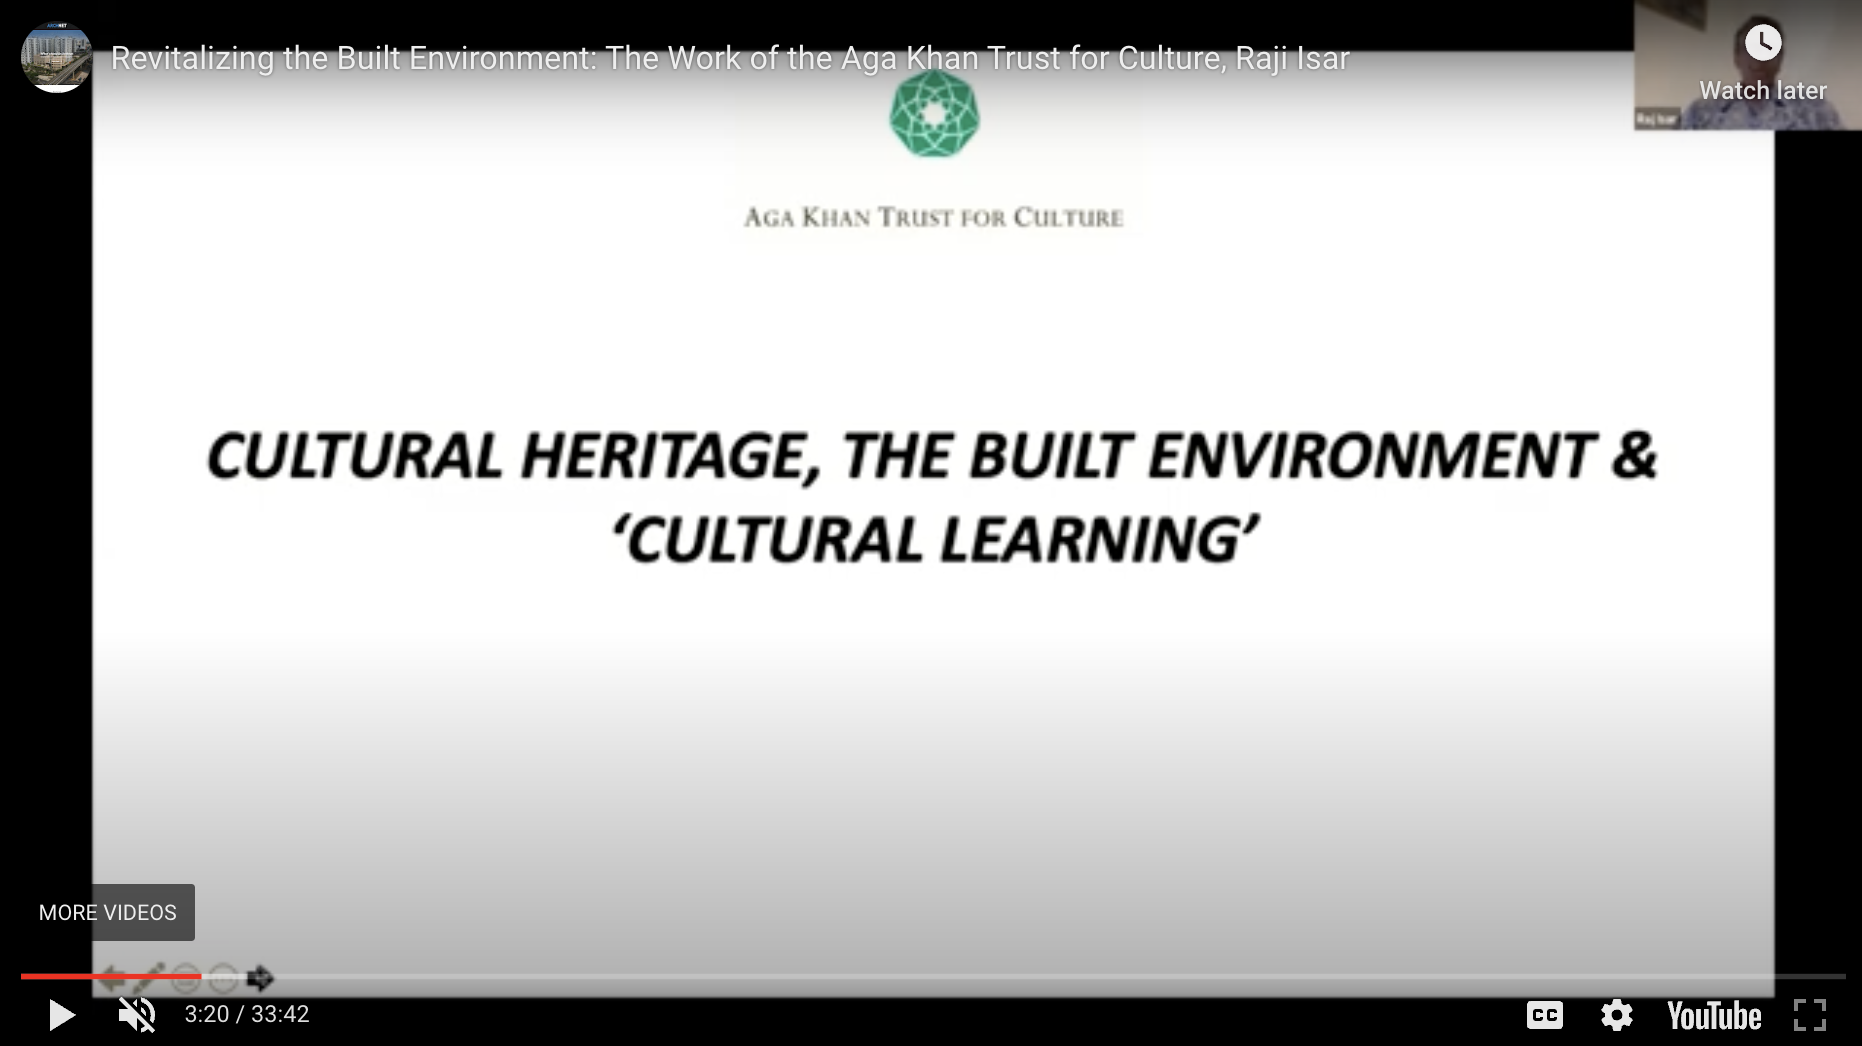 <p>A presentation by Yudhishtir Raj Isar of the Aga Khan Trust for Culture on the preservation of built cultural heritage and the involvement of the community. He concludes the presentation with a screening of short film by the <a href="https://www.archnet.org/authorities/1903" rel="noopener noreferrer" target="_blank">Aga Khan Trust for Culture</a>, "<a href="https://youtu.be/F8373bb_vfs?si=4f3bNQOoL_bEcwgQ" rel="noopener noreferrer" target="_blank">Hazrat Nizamuddin Basti: A Cultural Revival</a>."</p><p><br></p><p><strong>Also from the A3-Archnet Panel on Endangered Heritage, 31 July 2020</strong></p><ul><li><a href="https://www.archnet.org/authorities/9070?media_content_id=685510" rel="noopener noreferrer" target="_blank">Endangered Heritage: Repurposing as Preservation, Sola Akintunde</a></li><li><a href="https://www.archnet.org/authorities/9070?media_content_id=685505" rel="noopener noreferrer" target="_blank">Endangered Heritage: Building Early Accra, Kuukuwa Manful</a></li></ul>